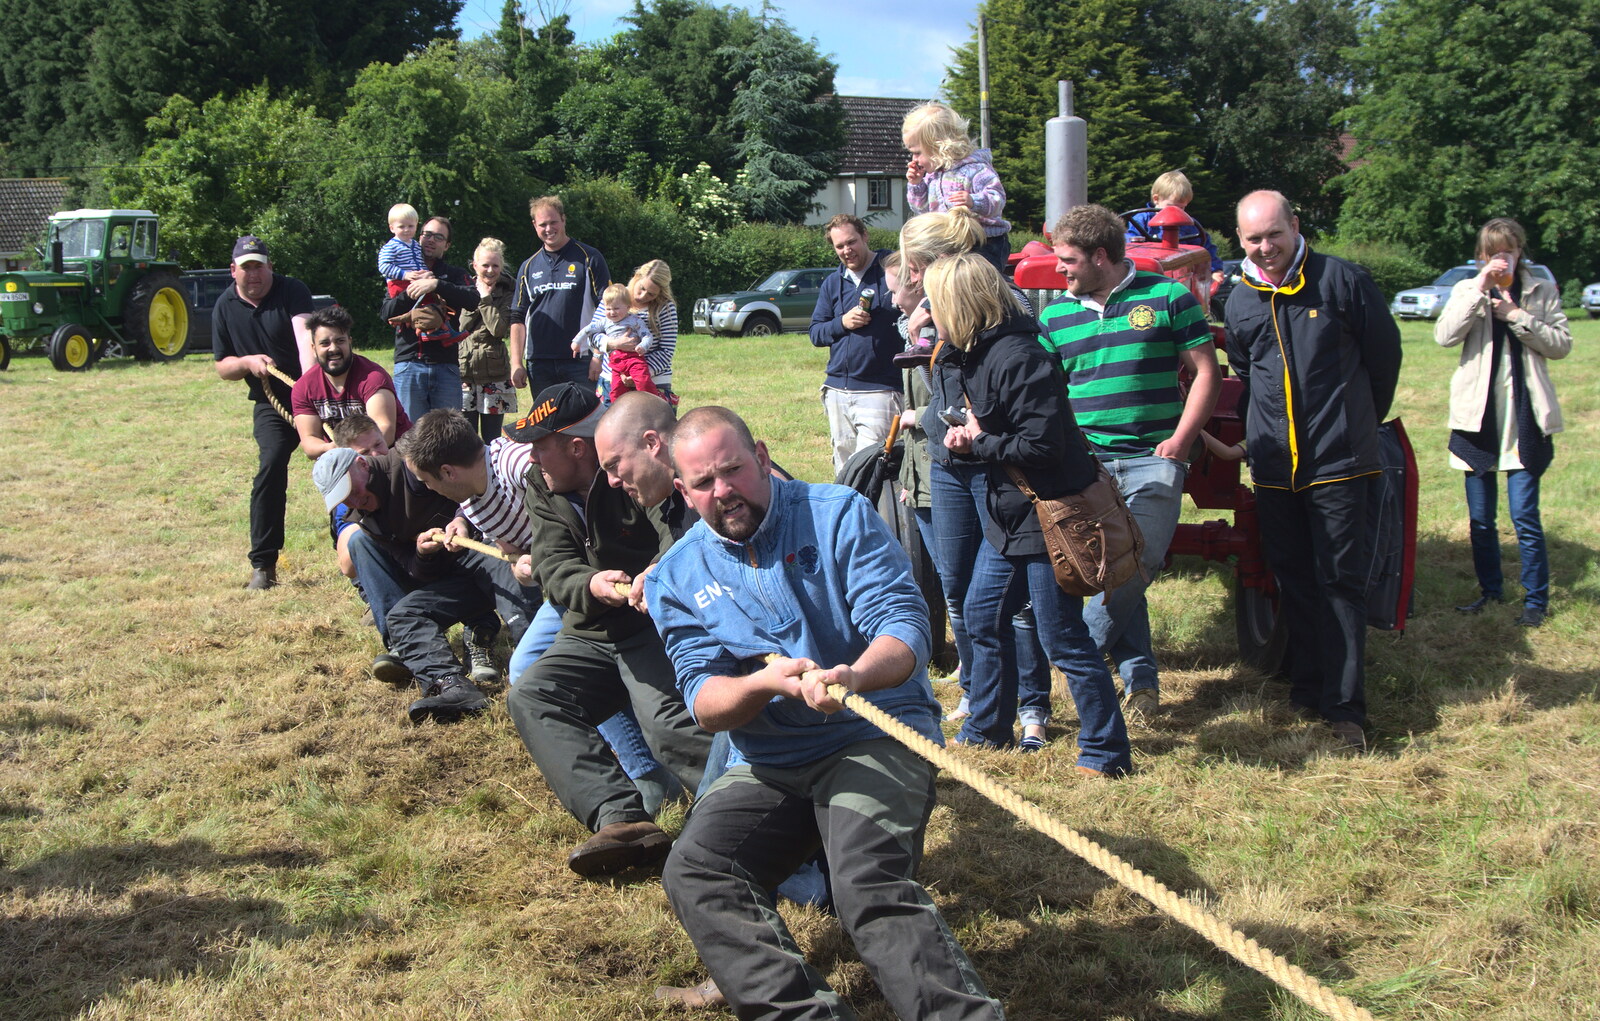 More tug-of-war-ing from Thrandeston Pig Roast and Tractors, Thrandeston Little Green, Suffolk - 23rd June 2013